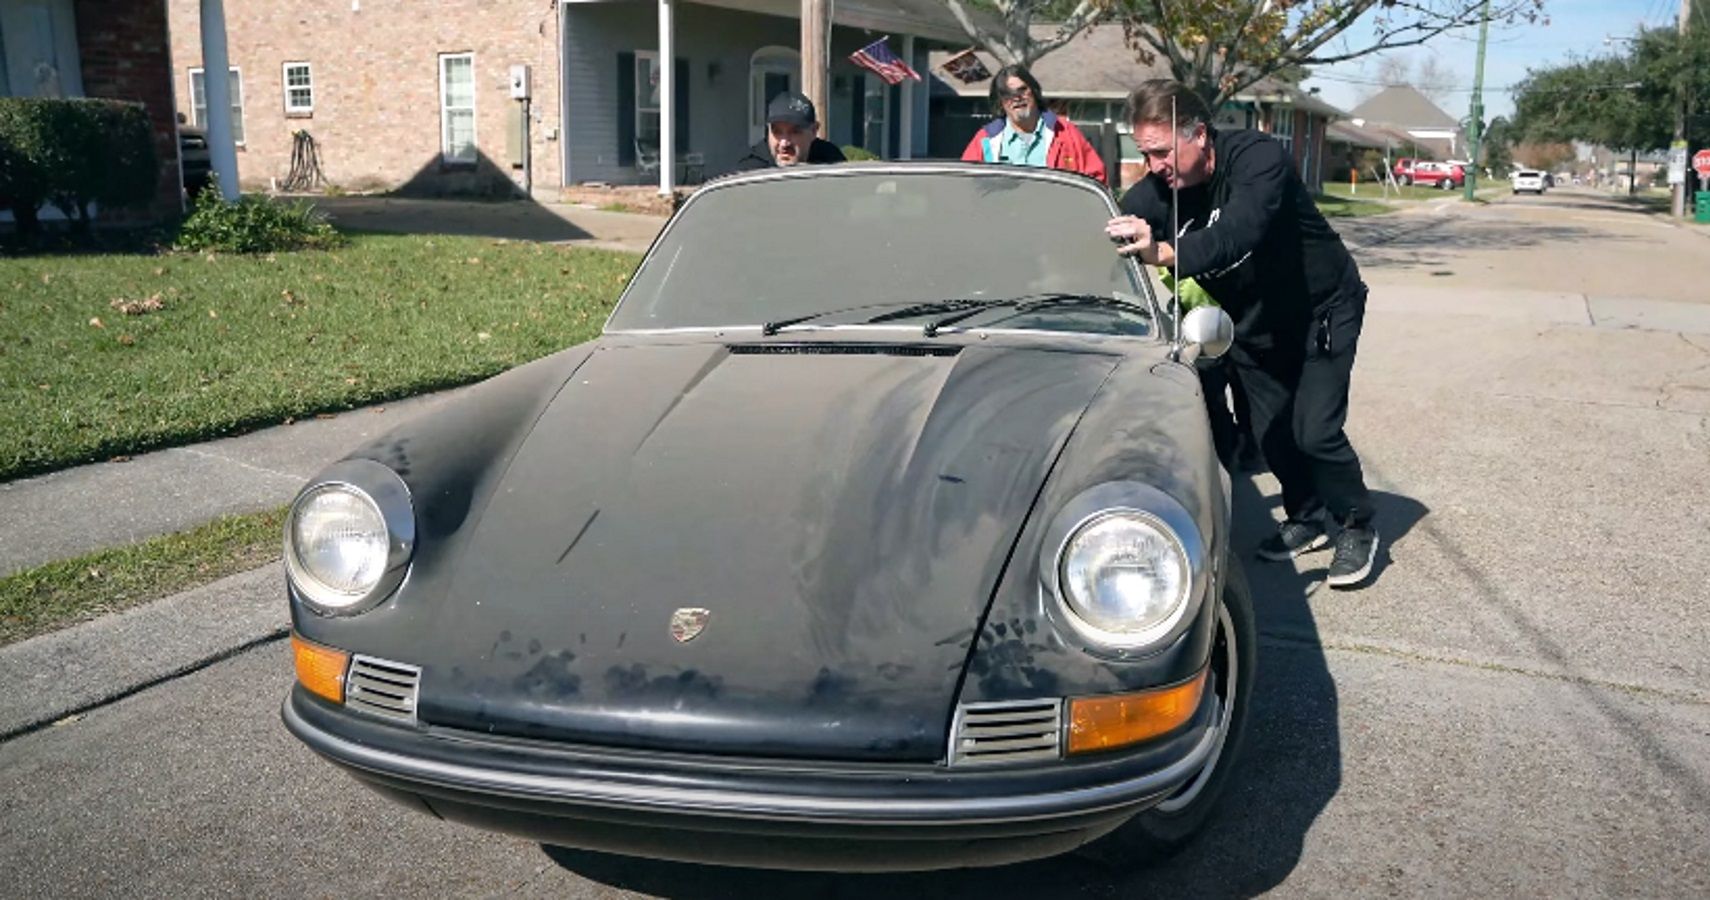 Dennis Collins Uncovers A Classic Porsche 911 With An Identity Crisis